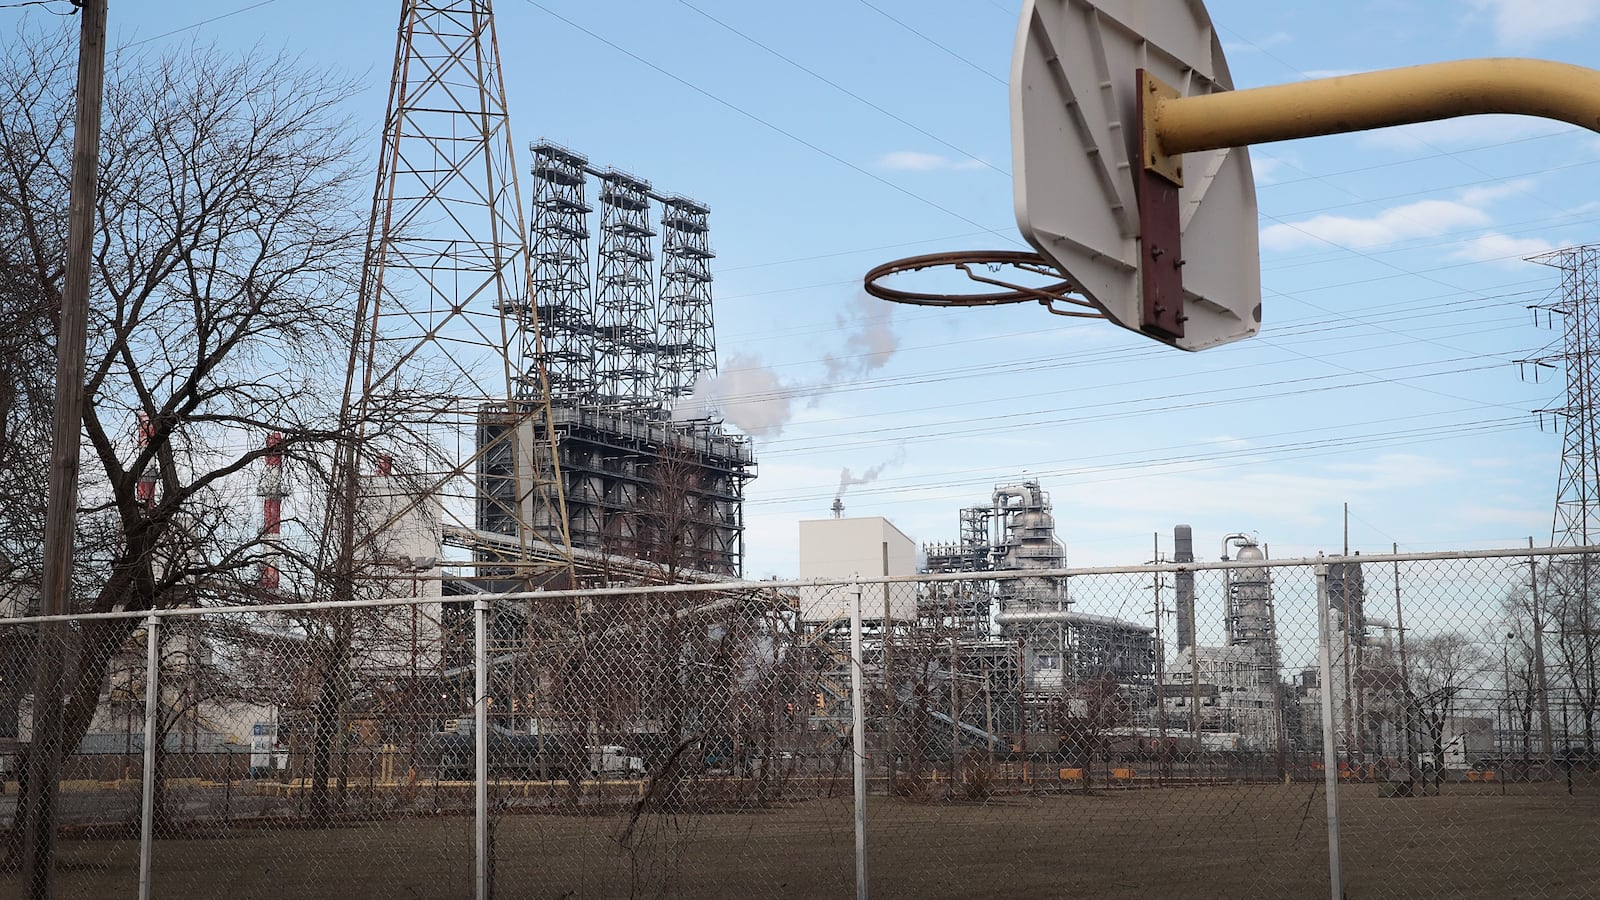 The BP refinery sits across the street from Marktown Park on January 08, 2019 in Whiting, Indiana. (Photo by Scott Olson/Getty Images)